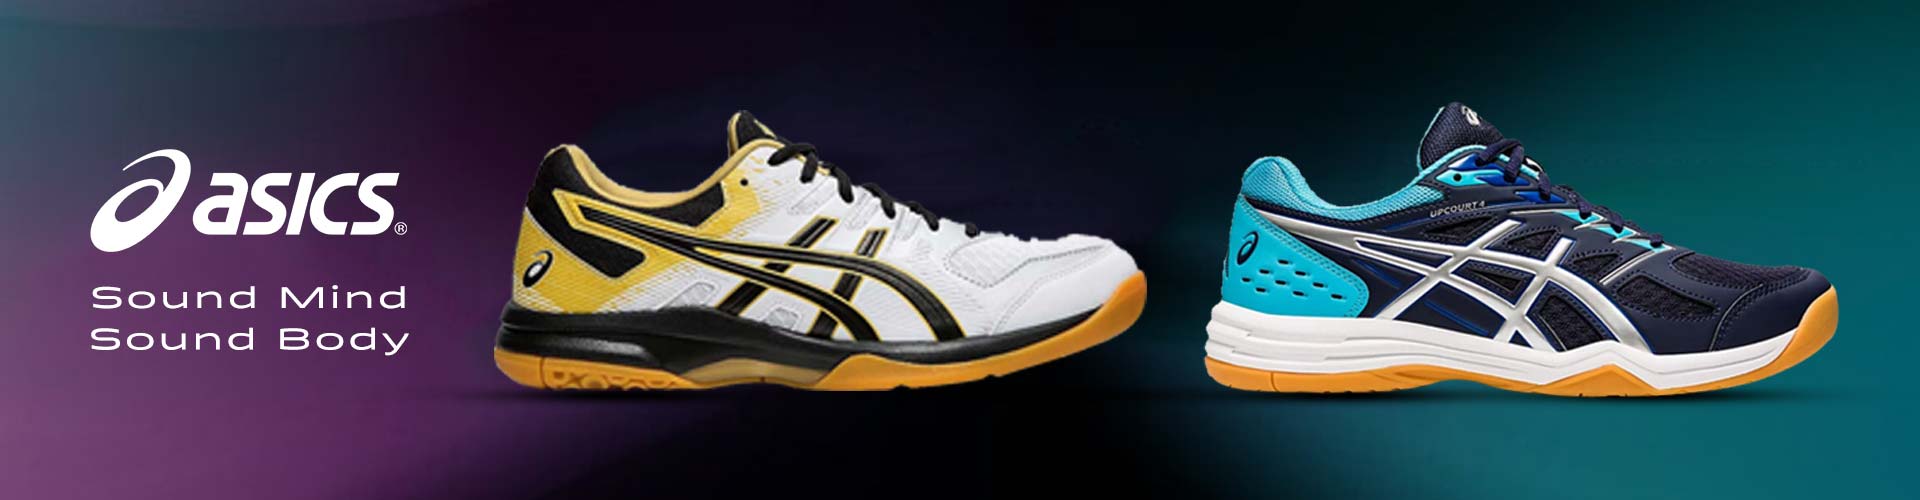 Buy ASICS Badminton Shoes at Best Price in India